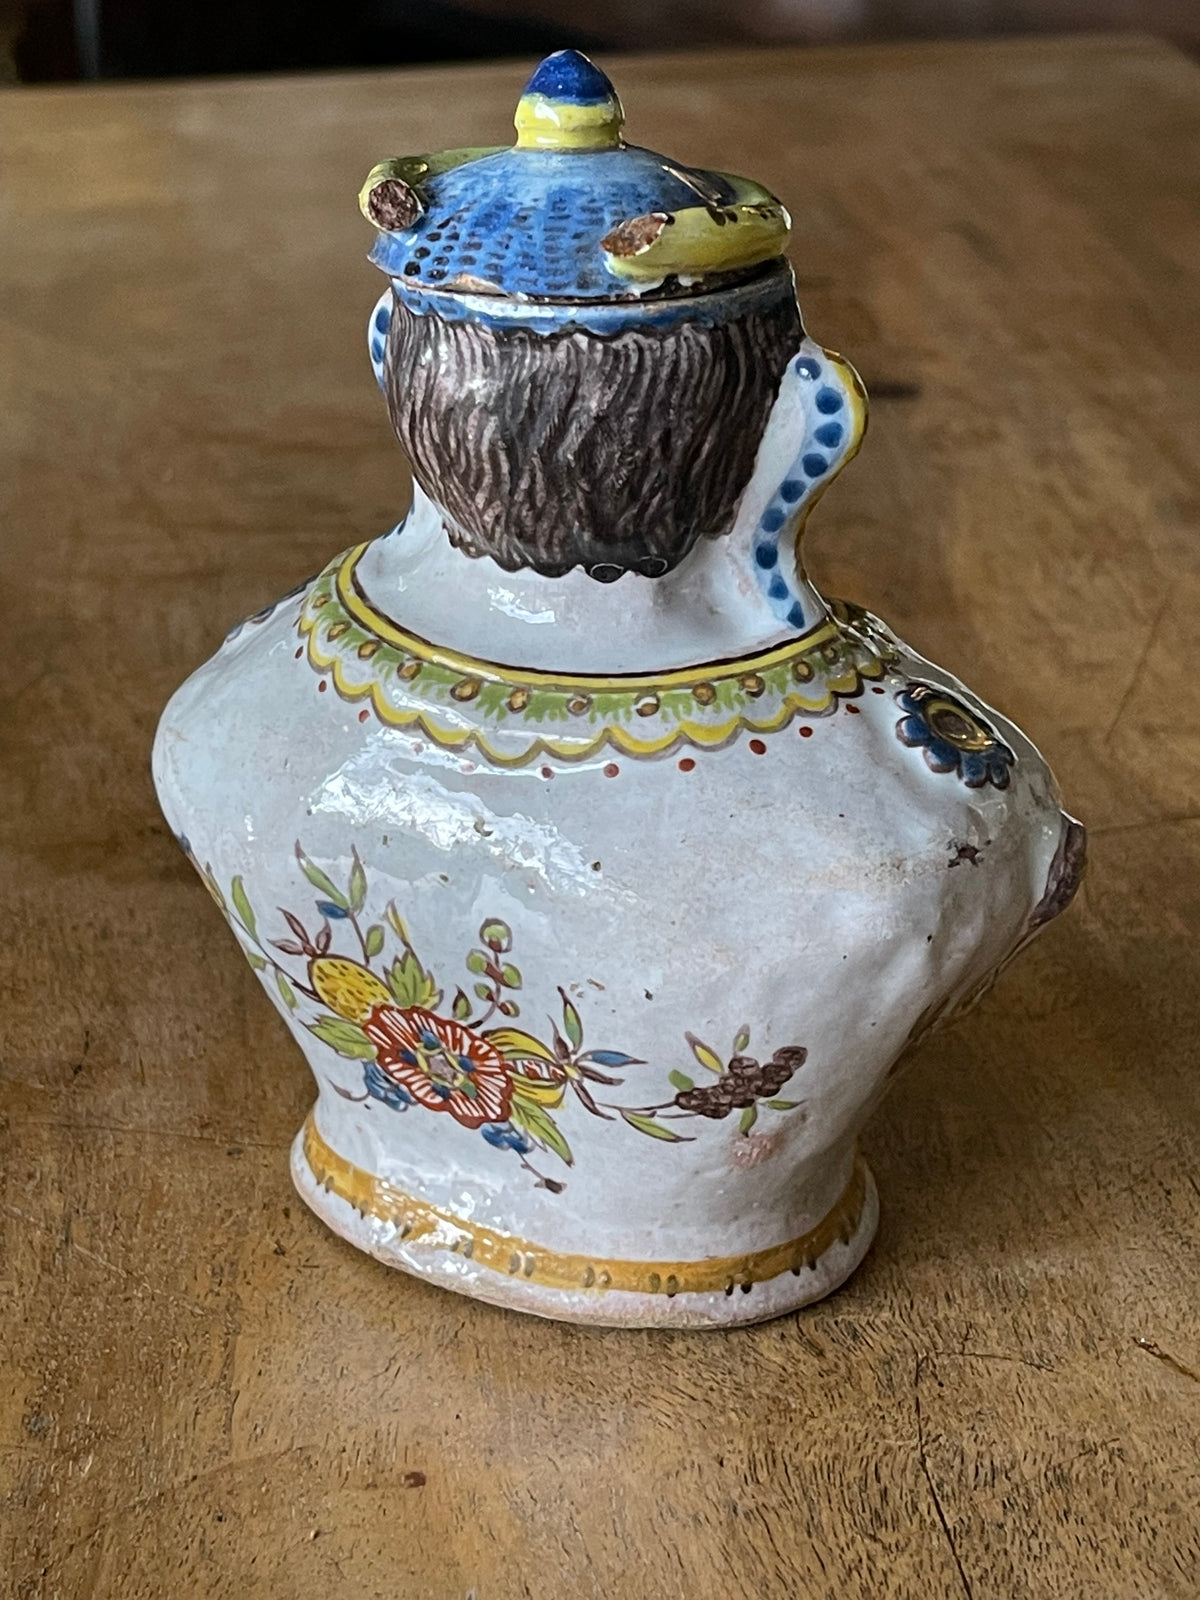 FRENCH 18TH CENTURY FAIENCE FIGURAL SERVING PIECE